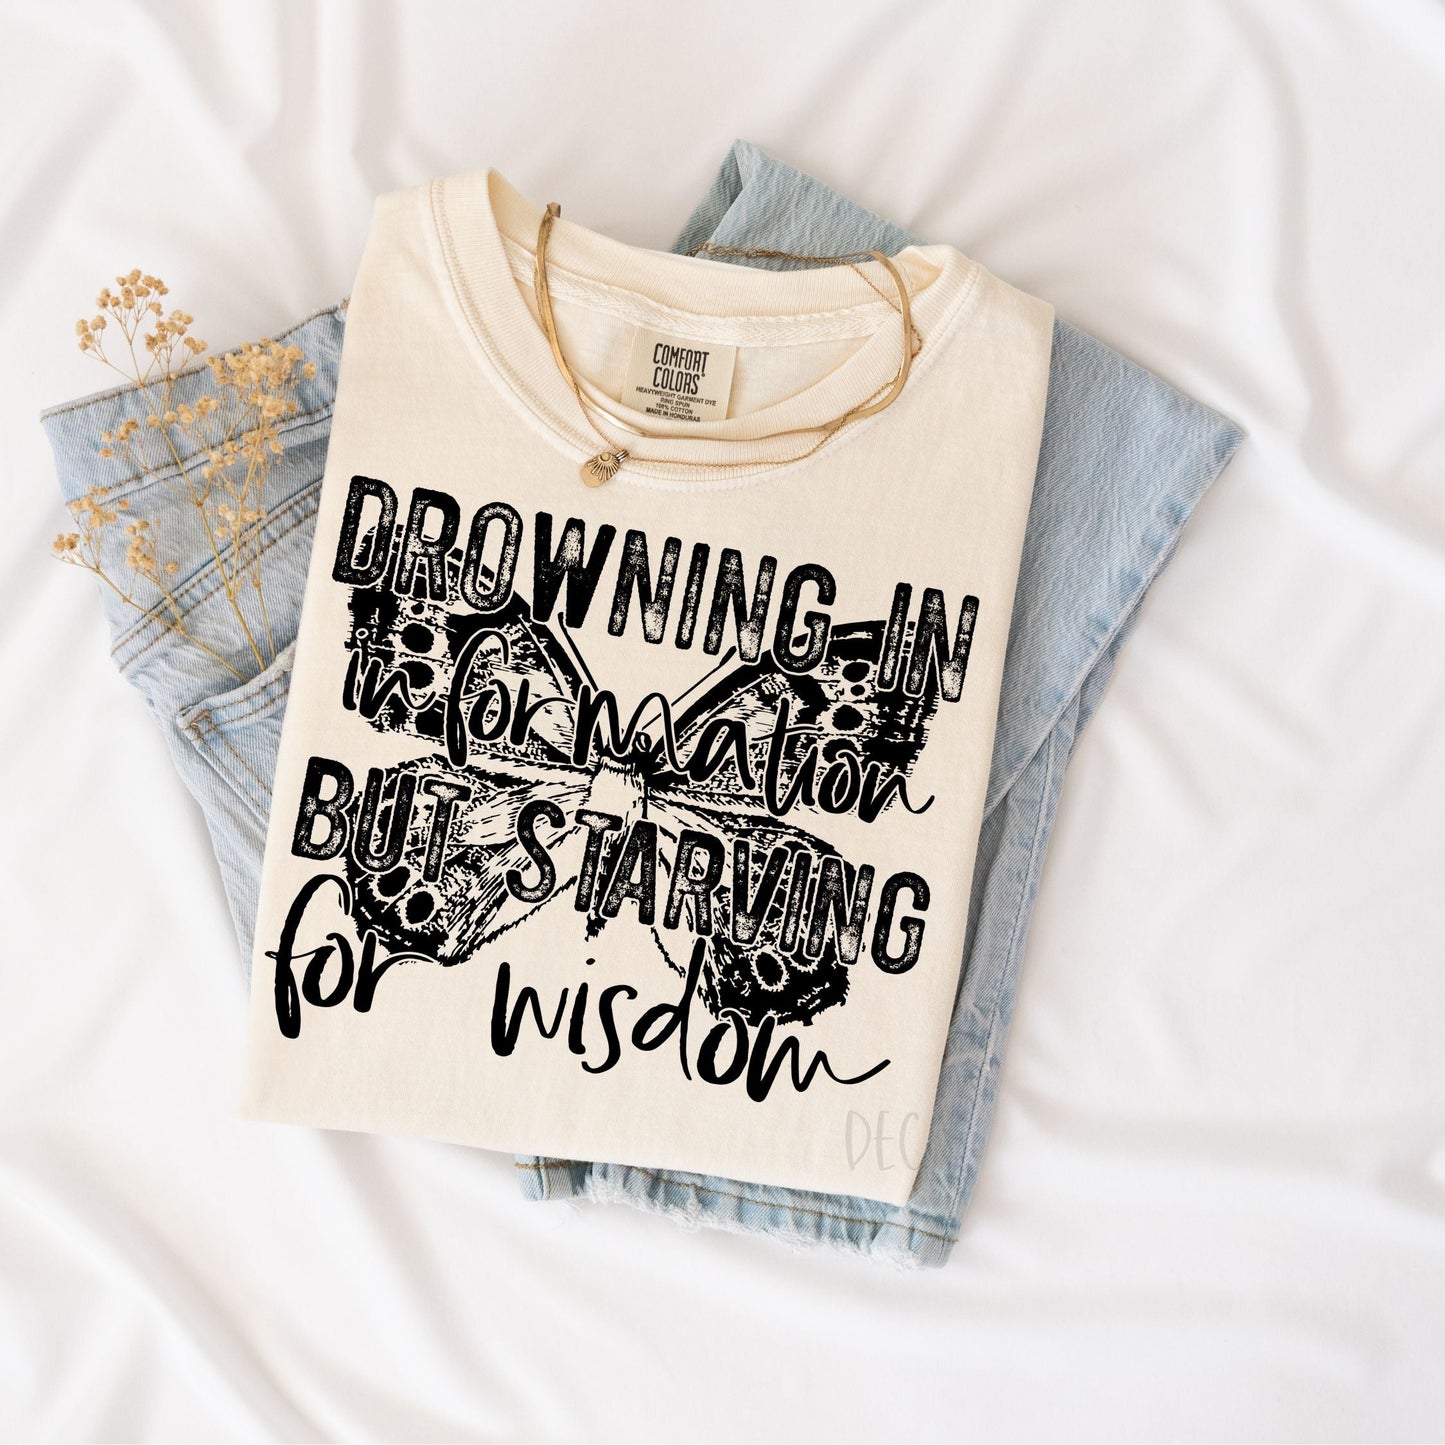 Drowning in information but starving for wisdom-Butterfly-Comfort Color-Tee